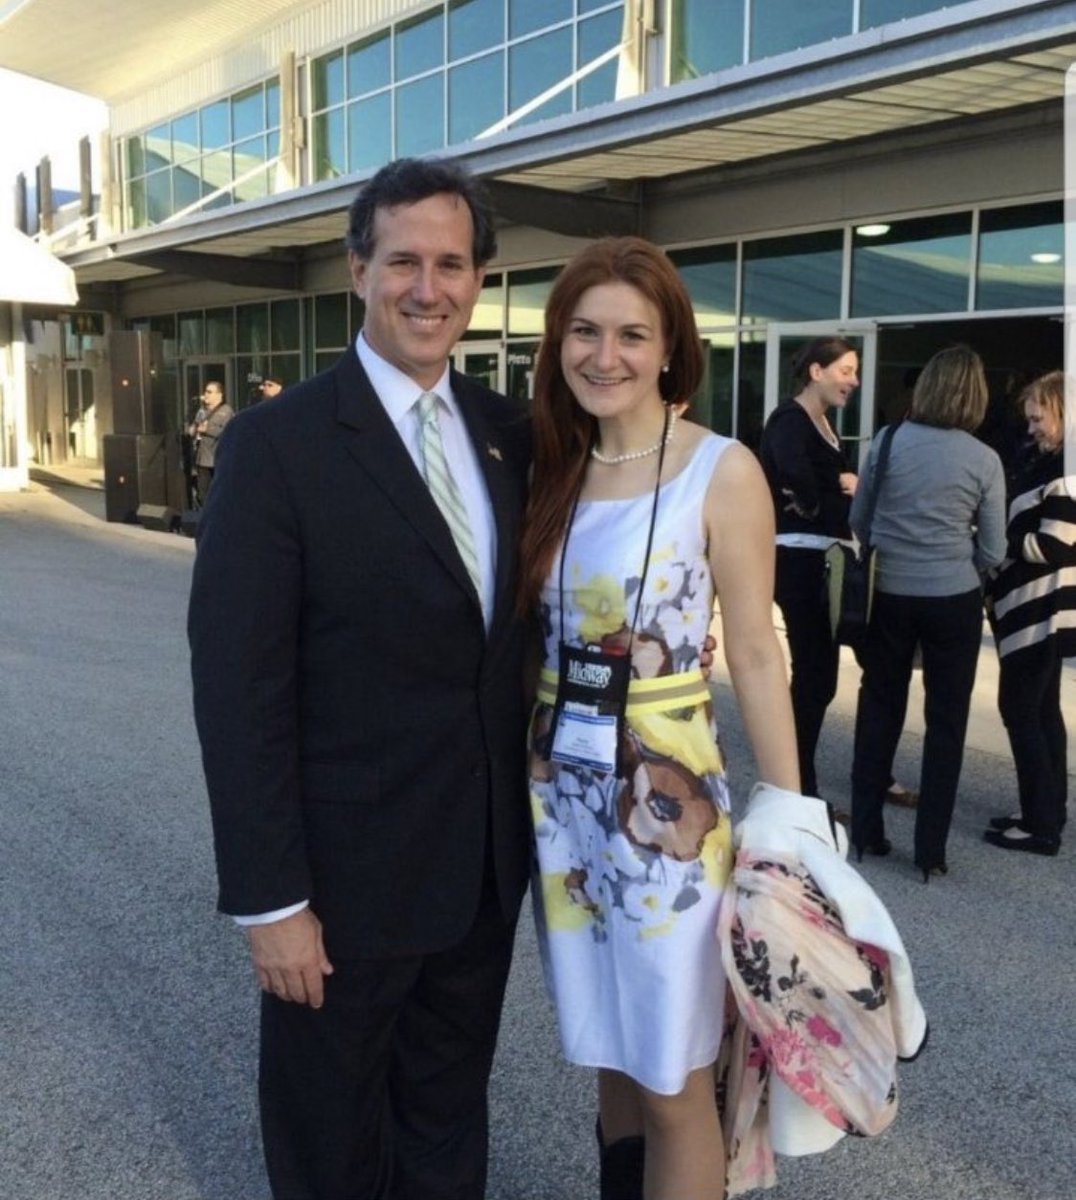 You definitely should NOT rt this photo of @RickSantorum with Russian spy @Maria_Butina that Rick wants off the internet